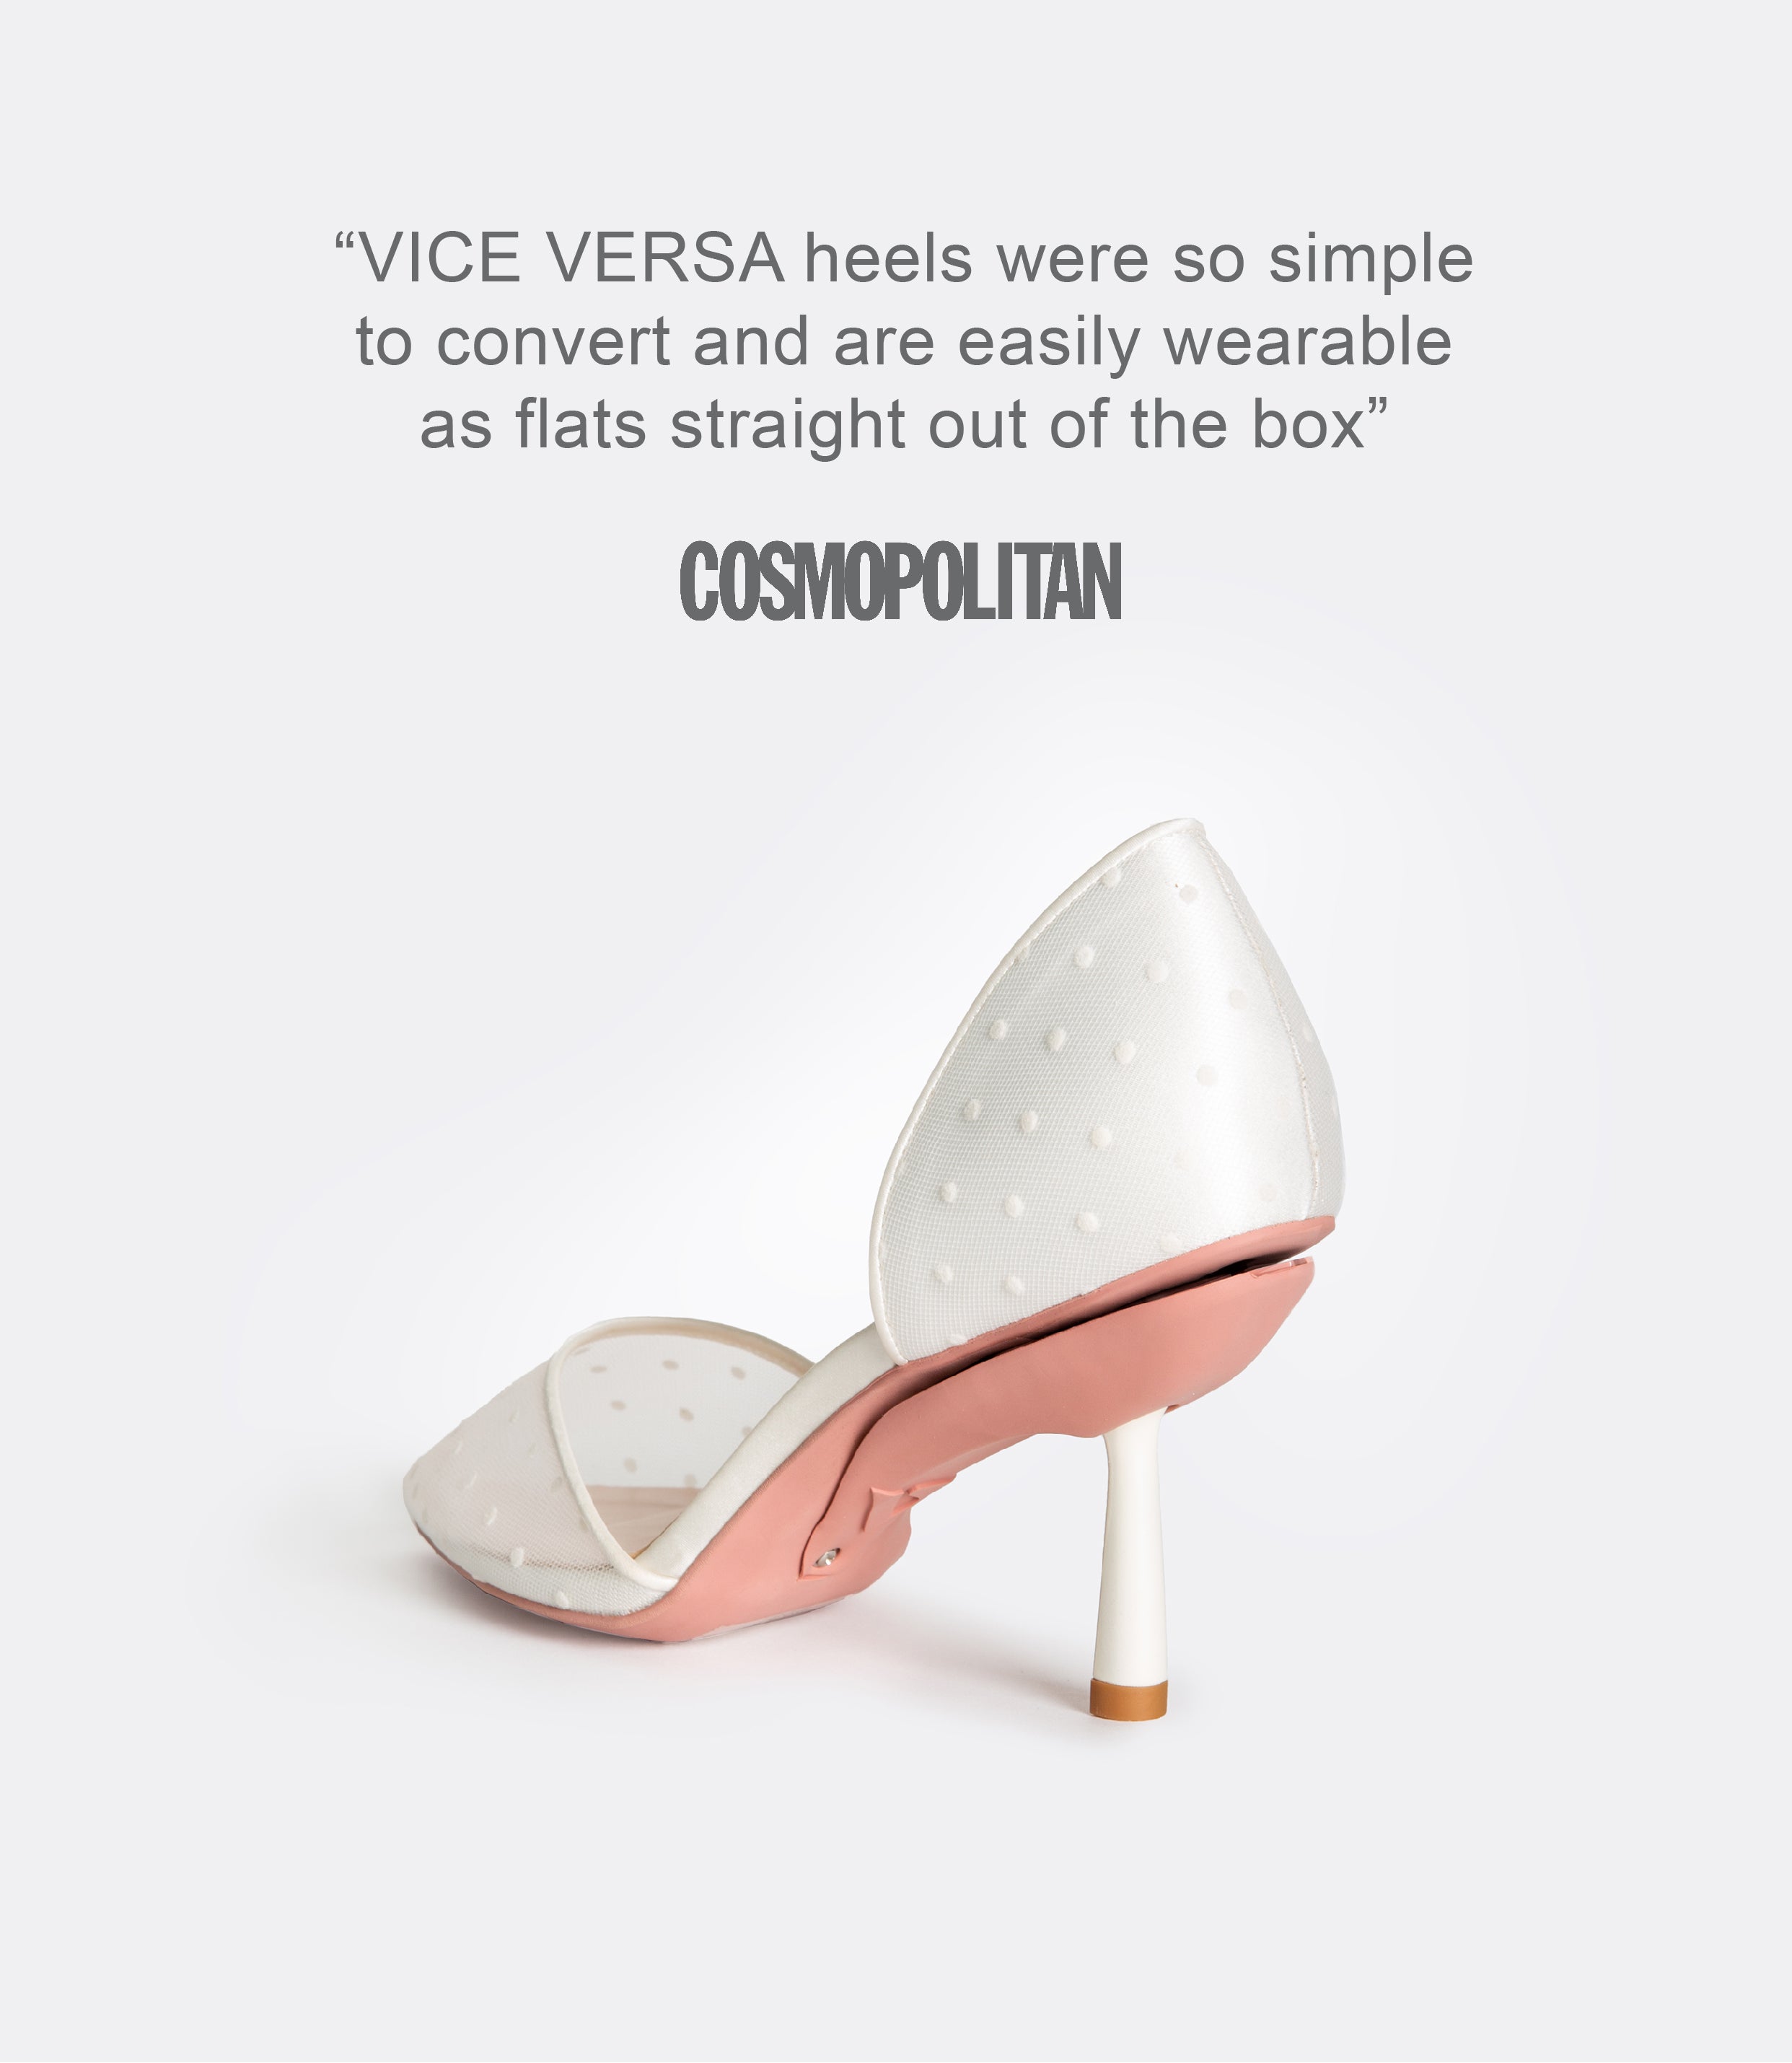 A quote from Cosmopolitan and a back view of a white polka dot mesh heel